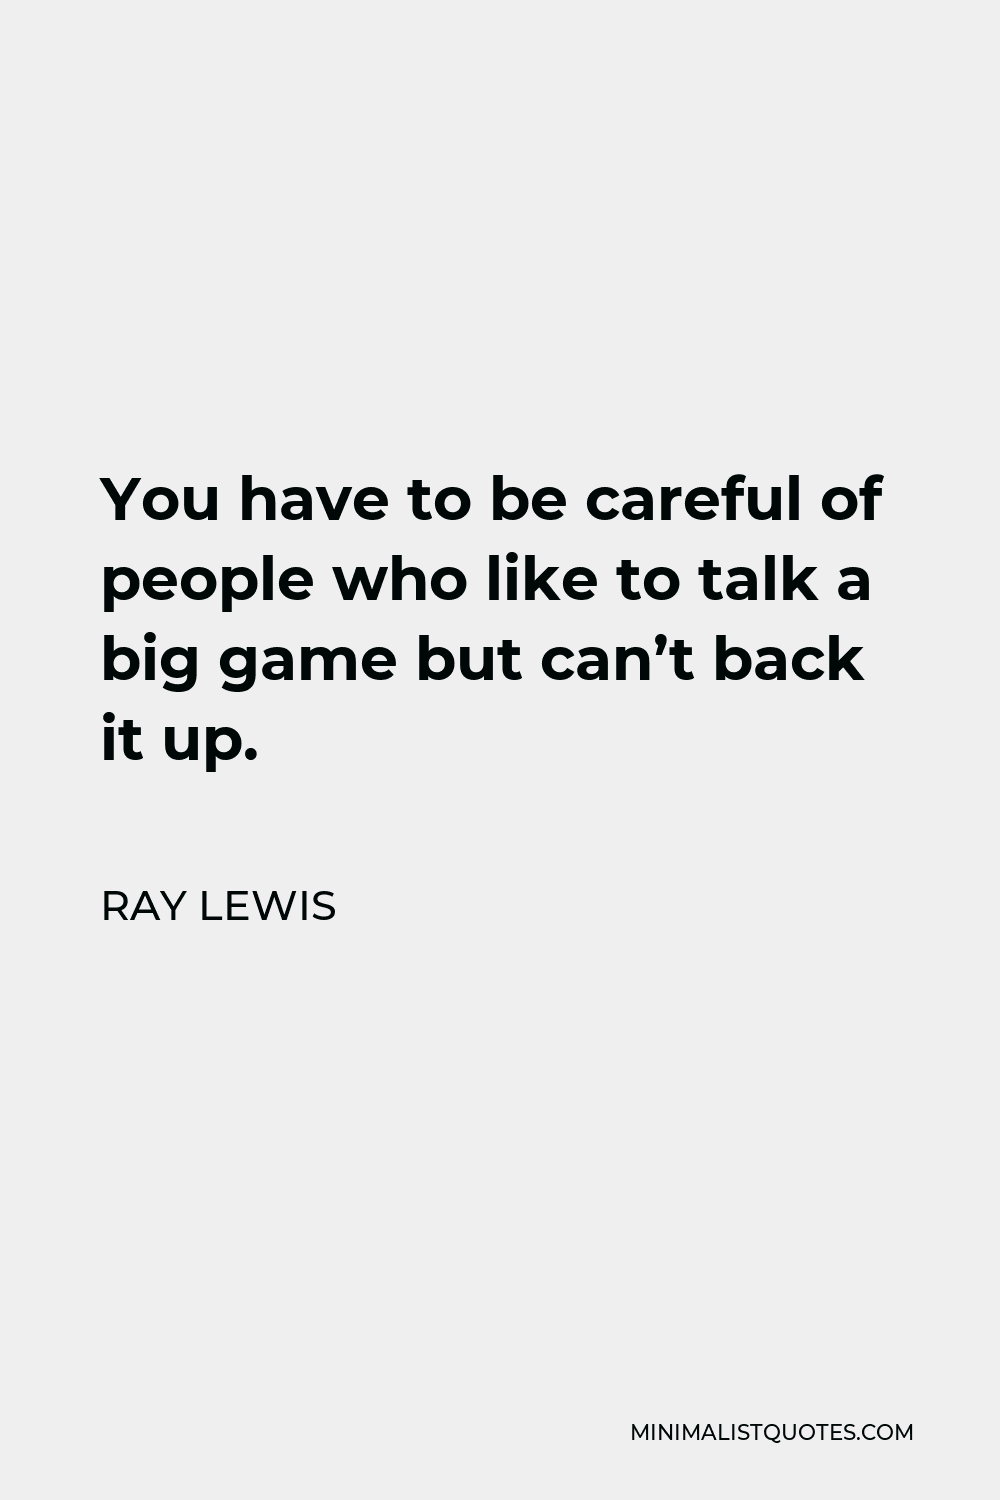 Ray Lewis Quote - You have to be careful of people who like to talk a big game but can’t back it up.